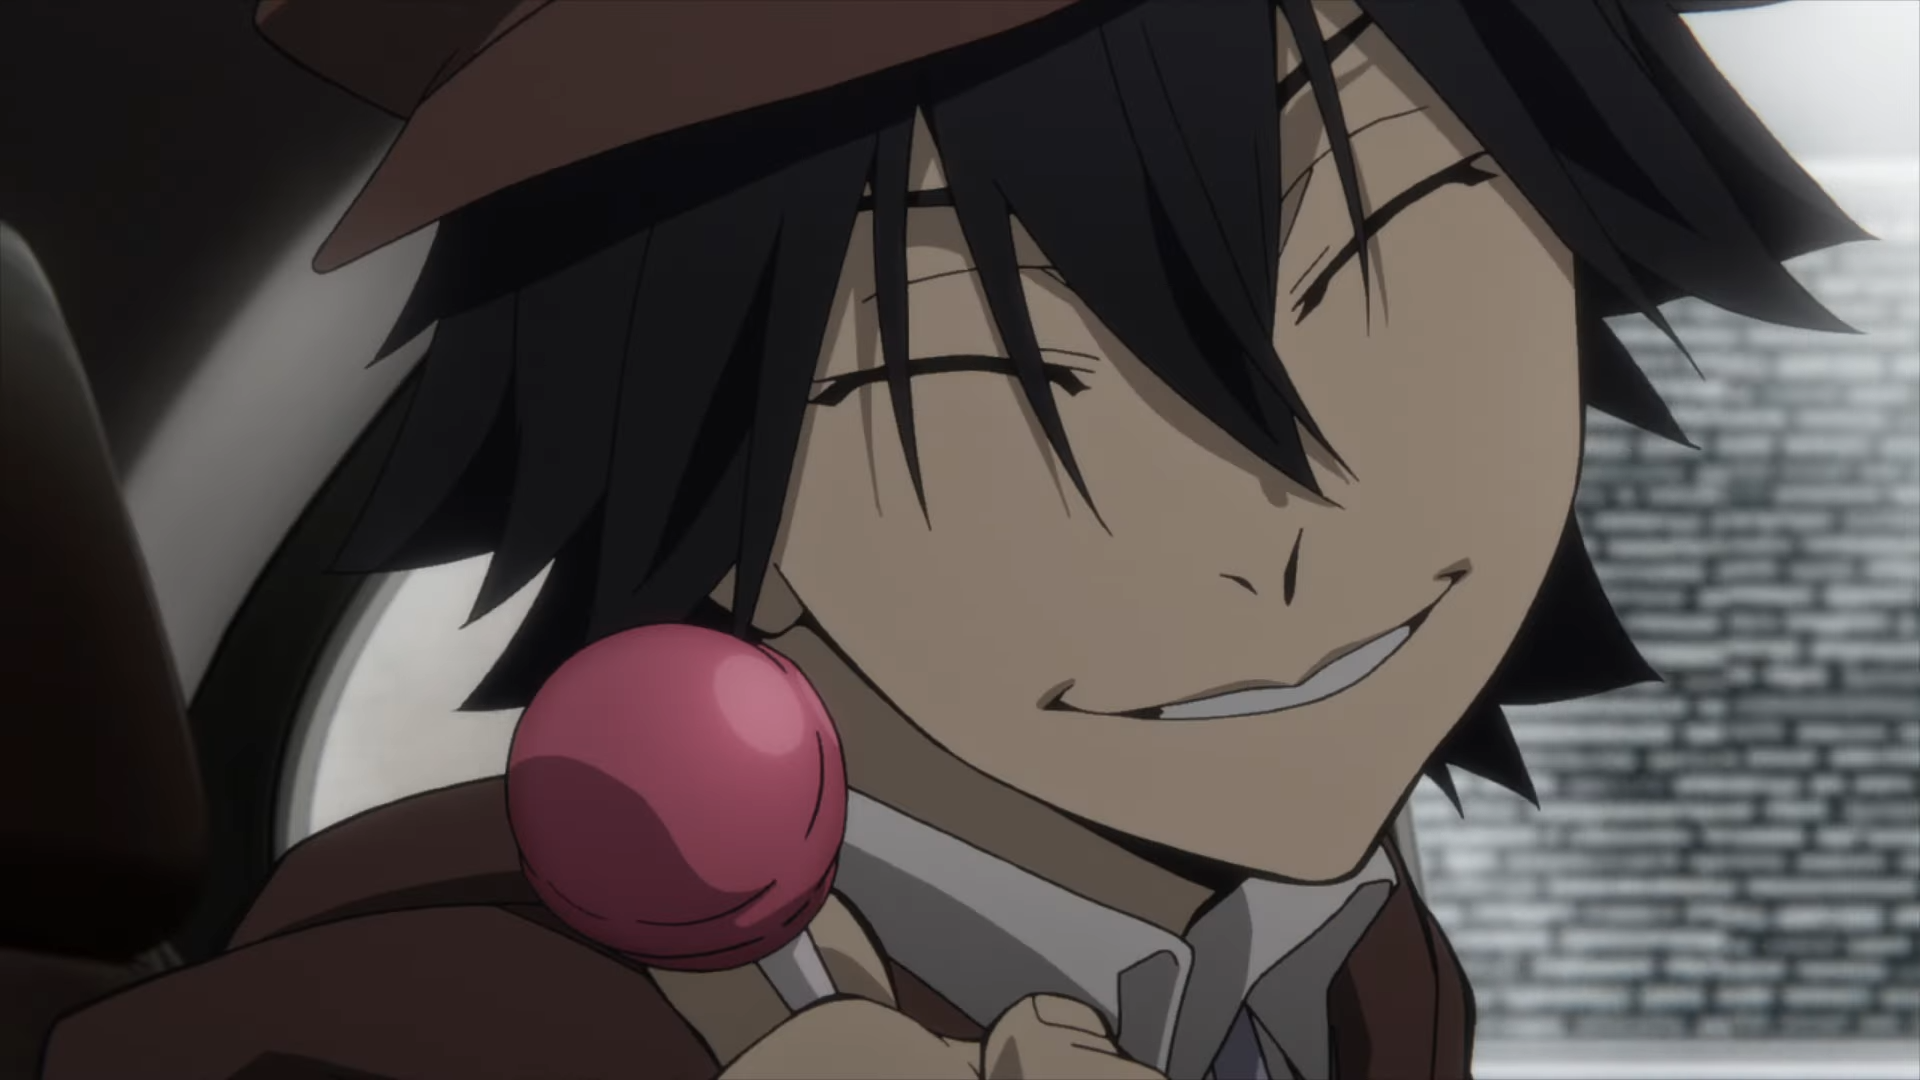 Bungo Stray Dogs Season 4 Episode 4 Preview Released